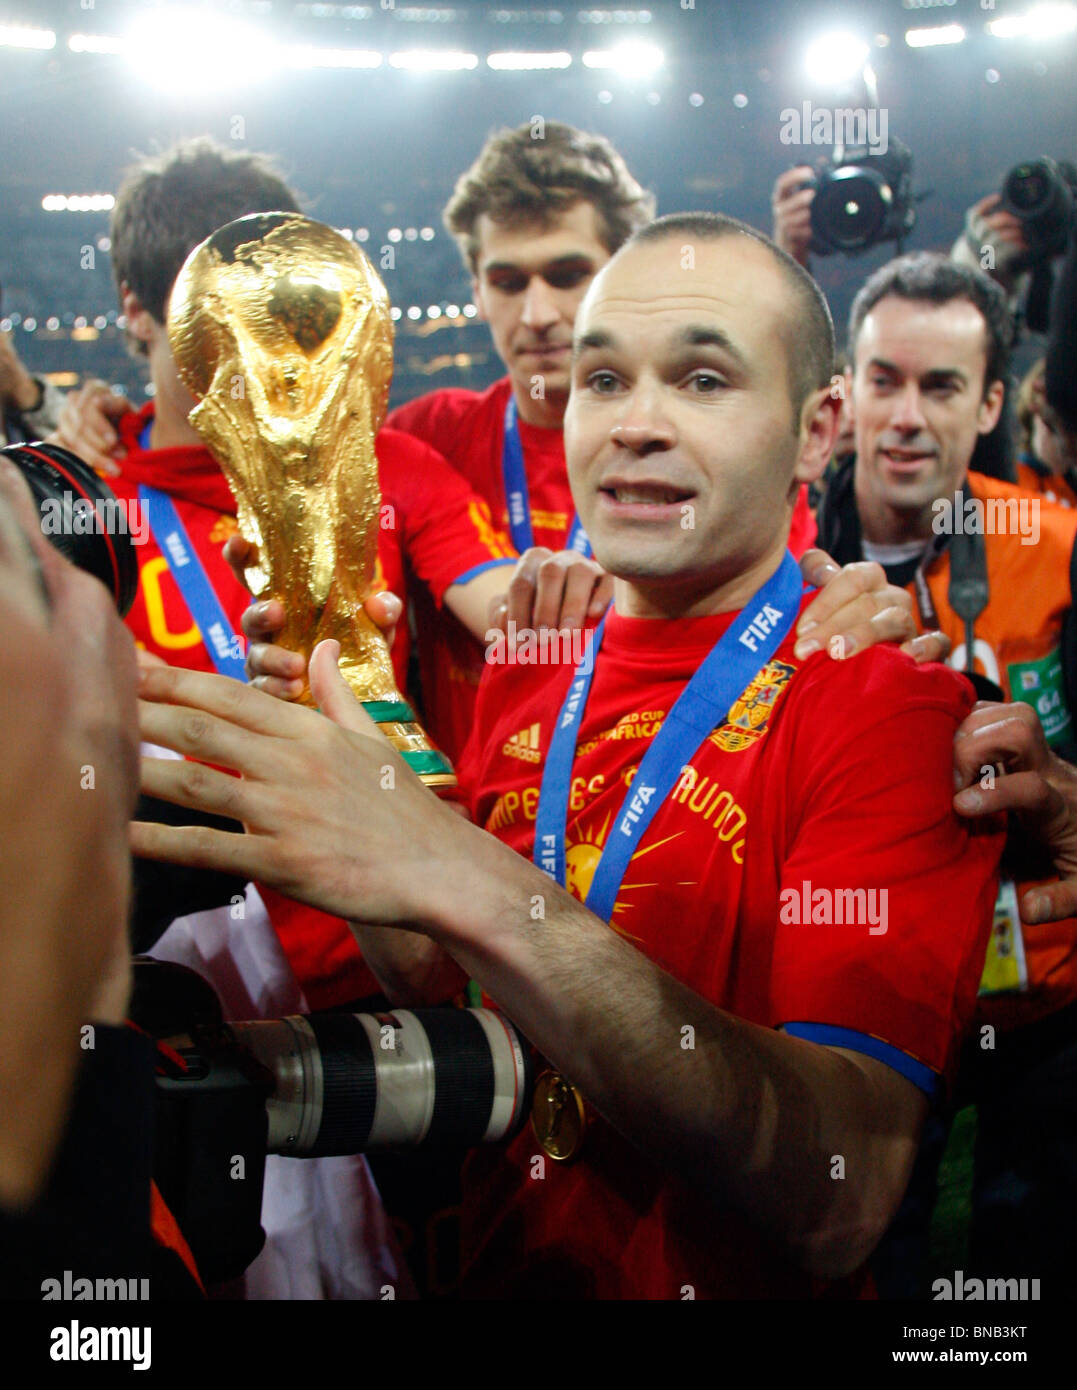 ANDRES INIESTA WITH THE WORLD NETHERLANDS V SPAIN SOCCER CITY JOHANNESBURG SOUTH AFRICA 11 July 2010 Stock Photo